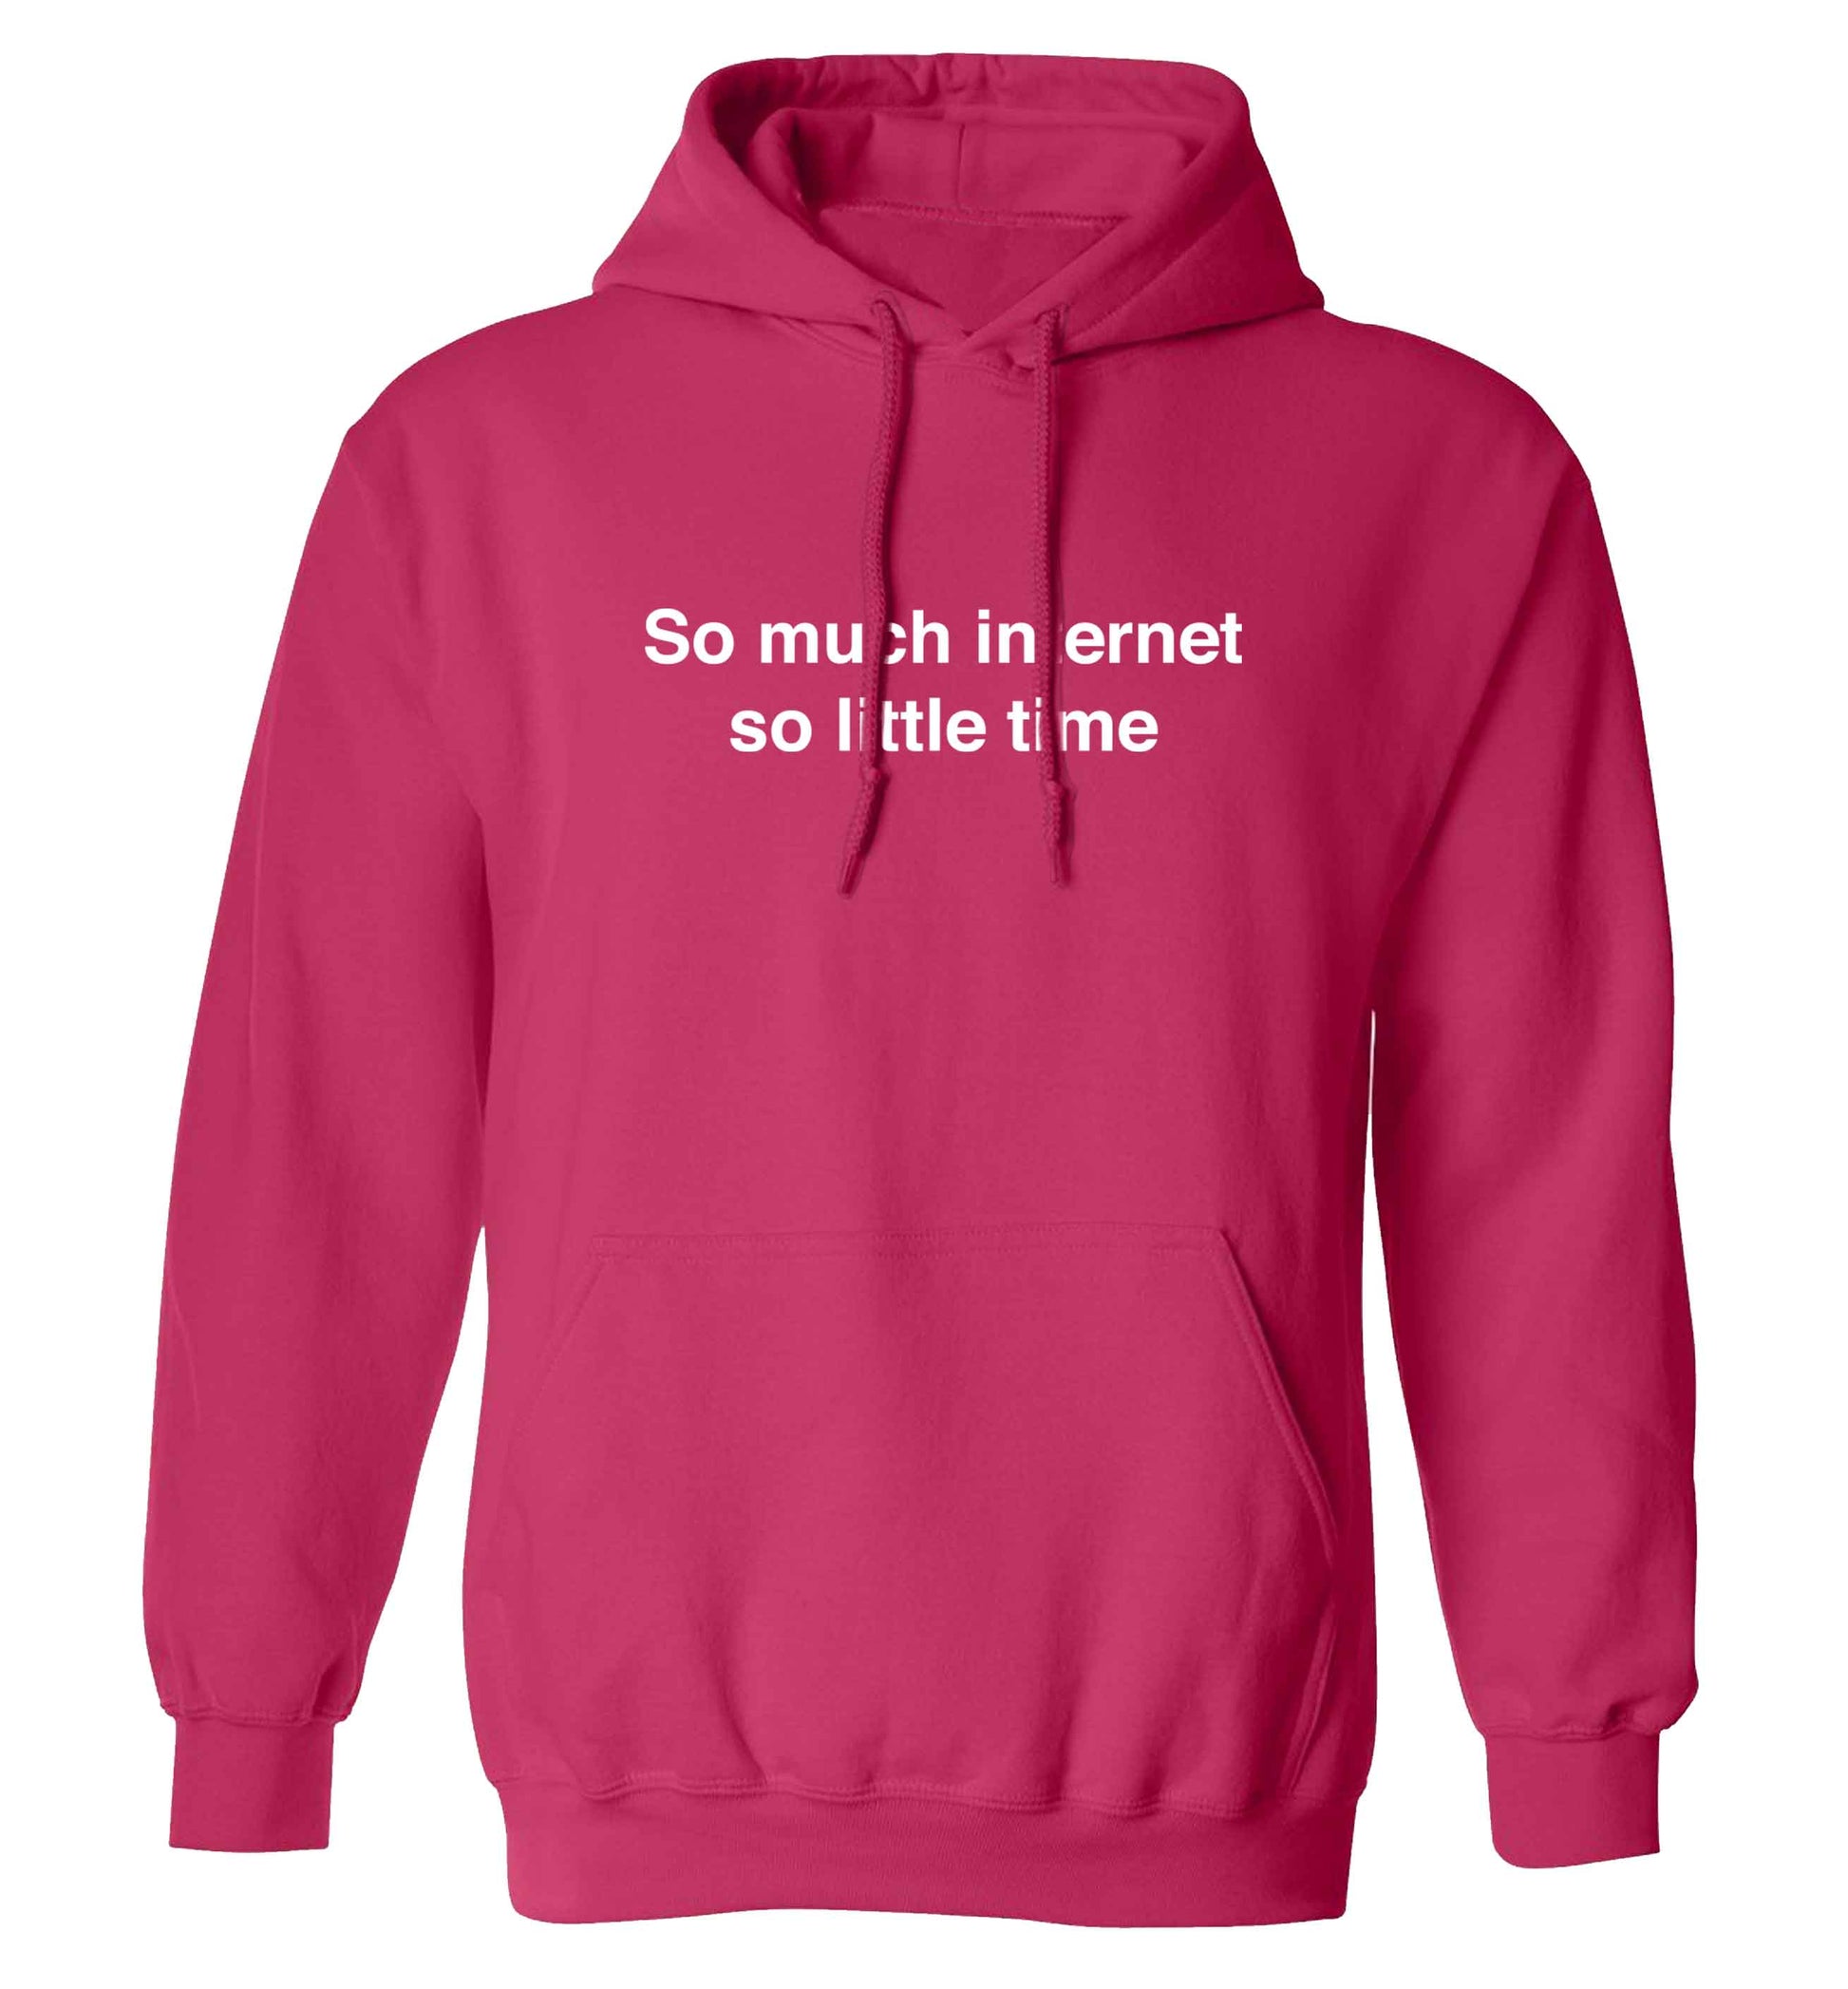 So much internet so little time adults unisex pink hoodie 2XL